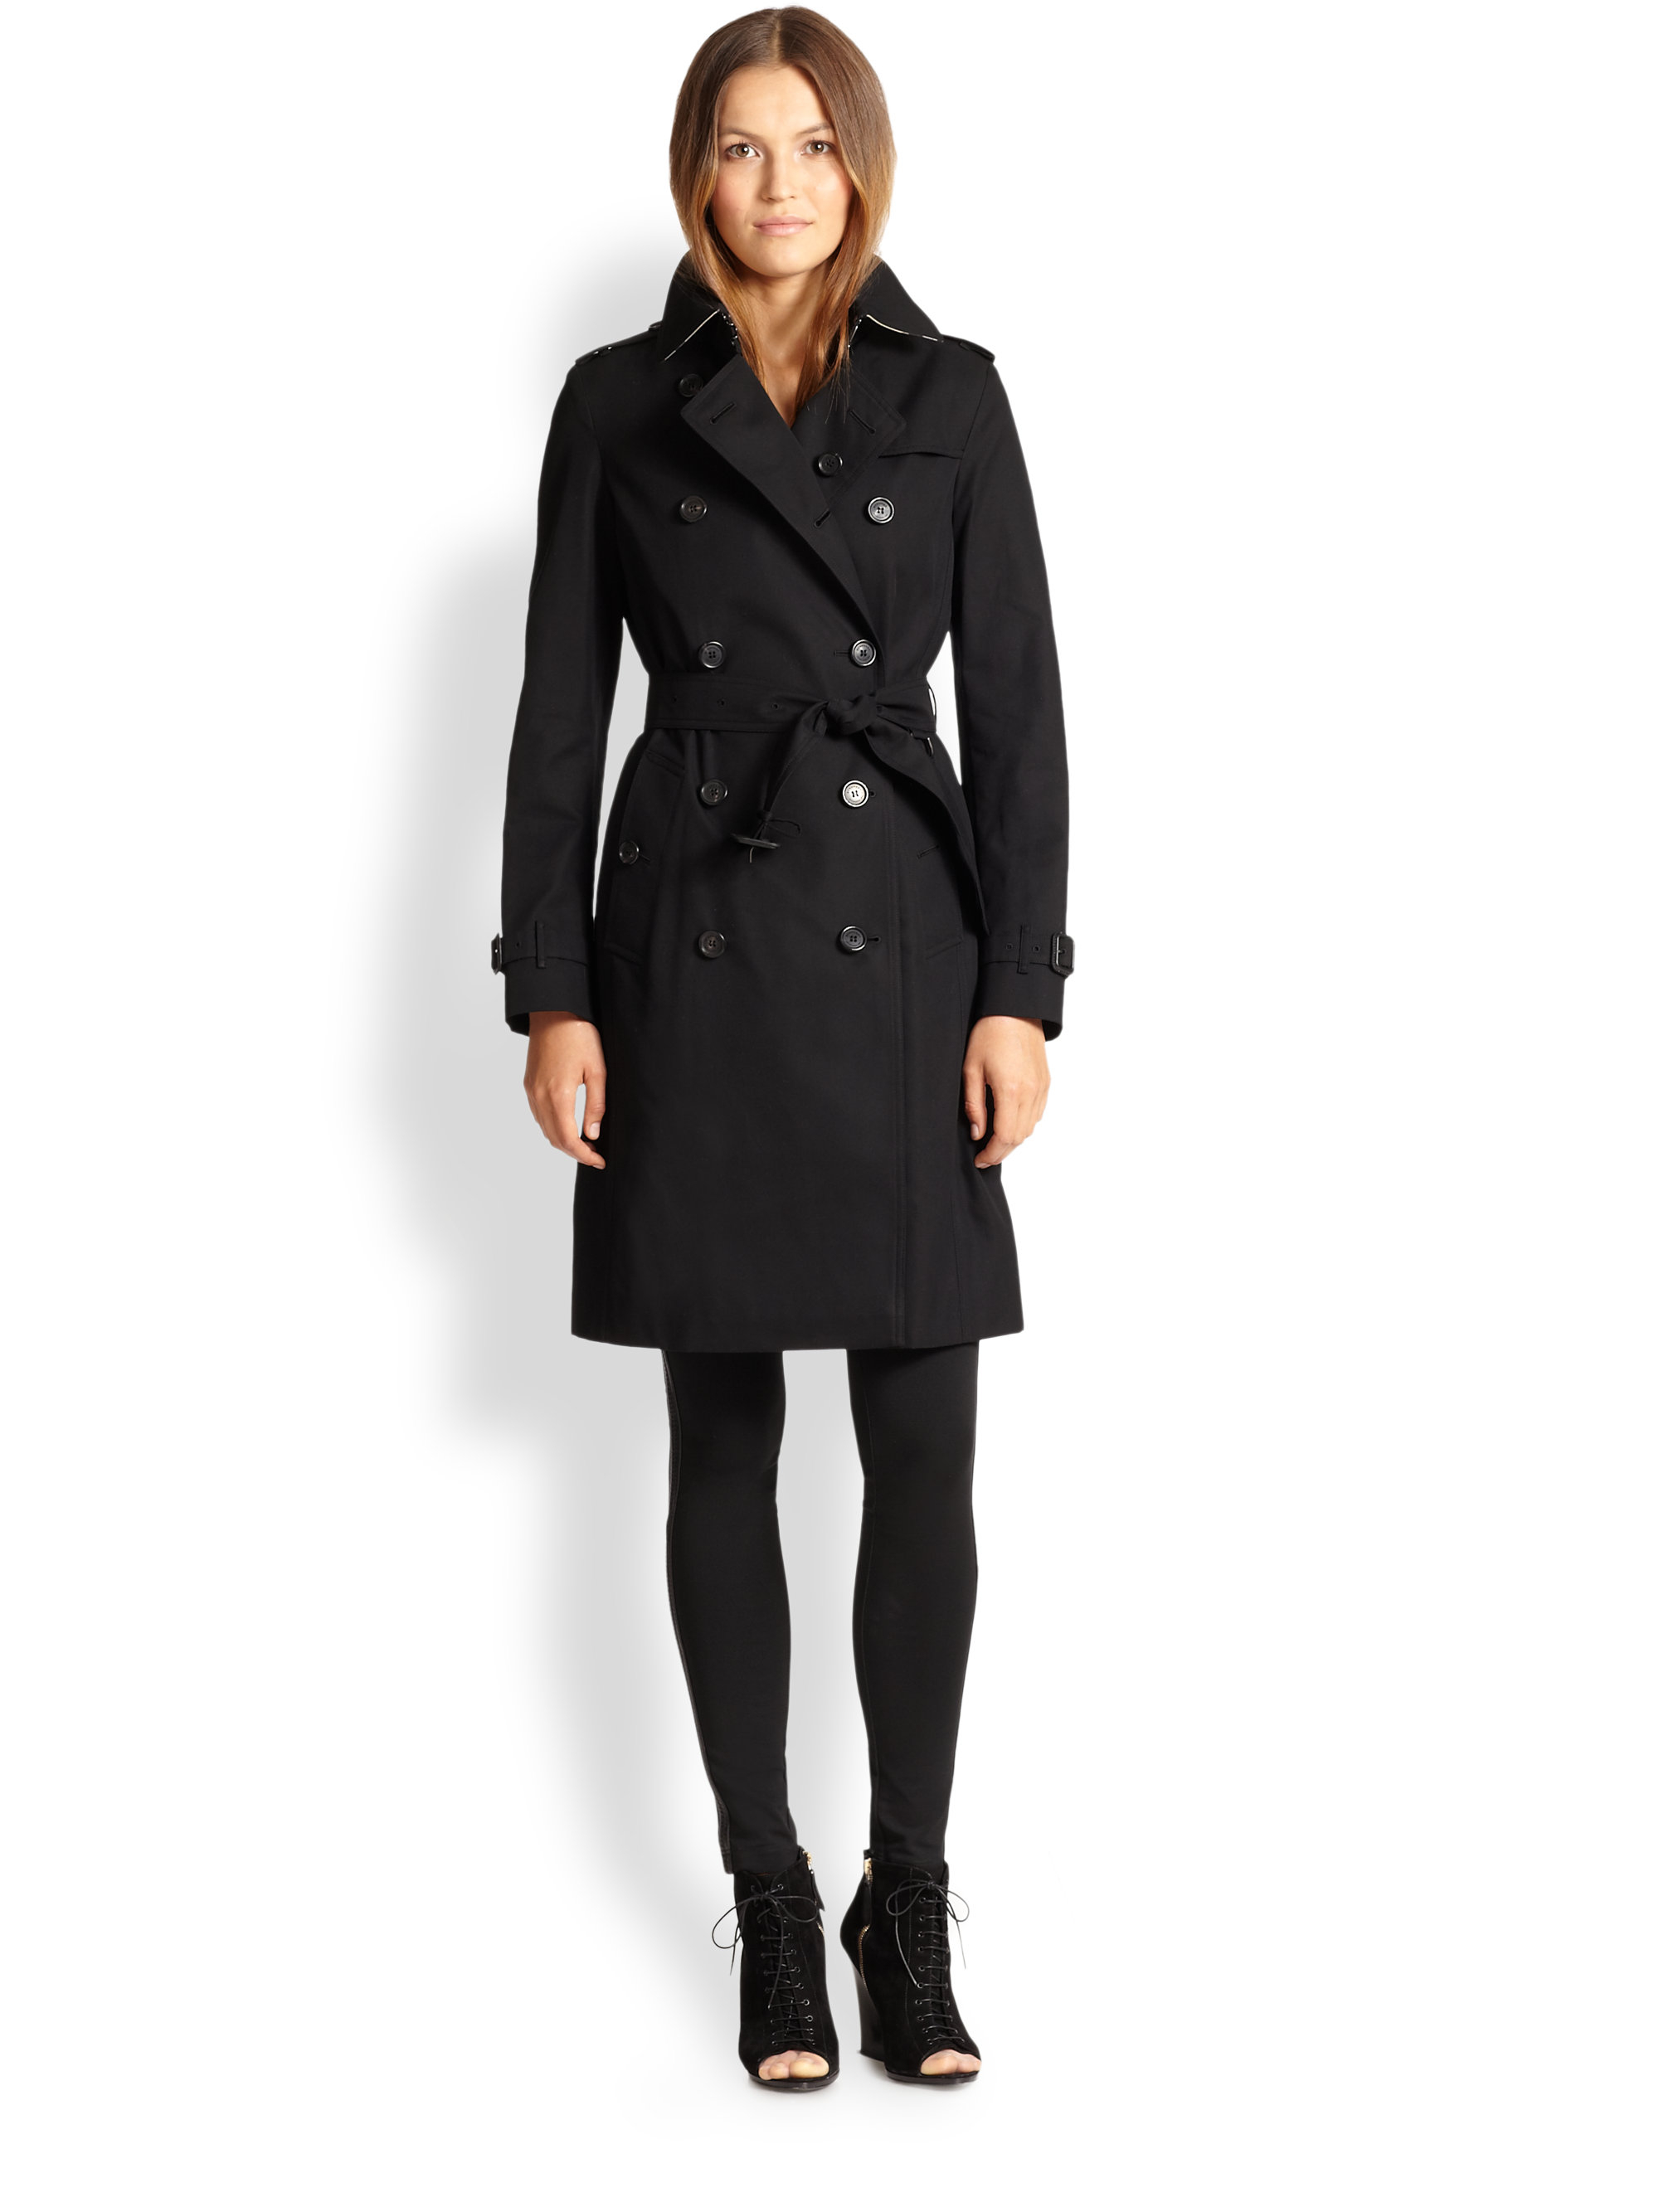 ONLY Womens 15167883BLACK Black Cotton Trench Coat